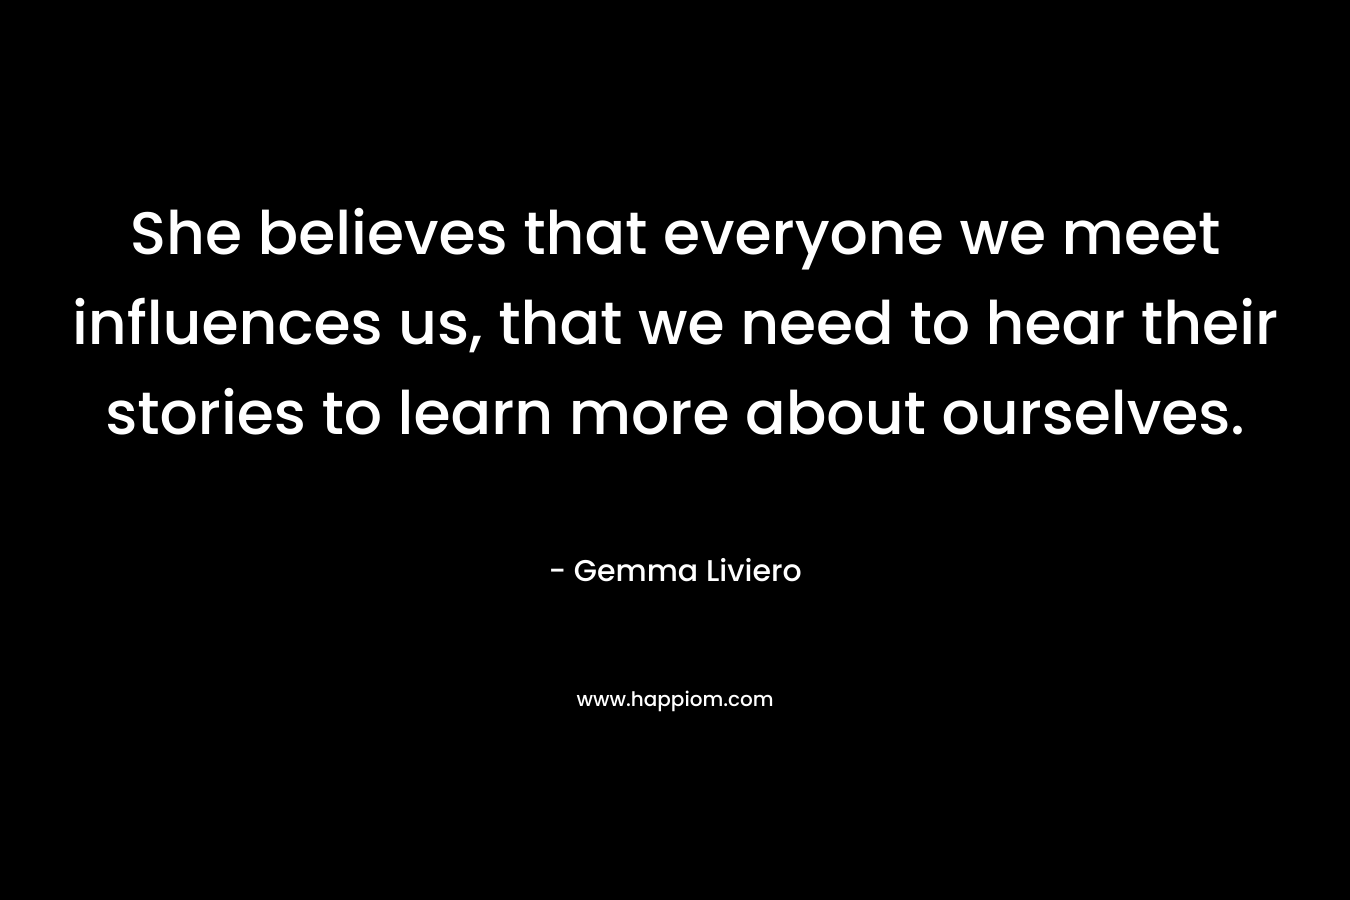 She believes that everyone we meet influences us, that we need to hear their stories to learn more about ourselves. – Gemma Liviero